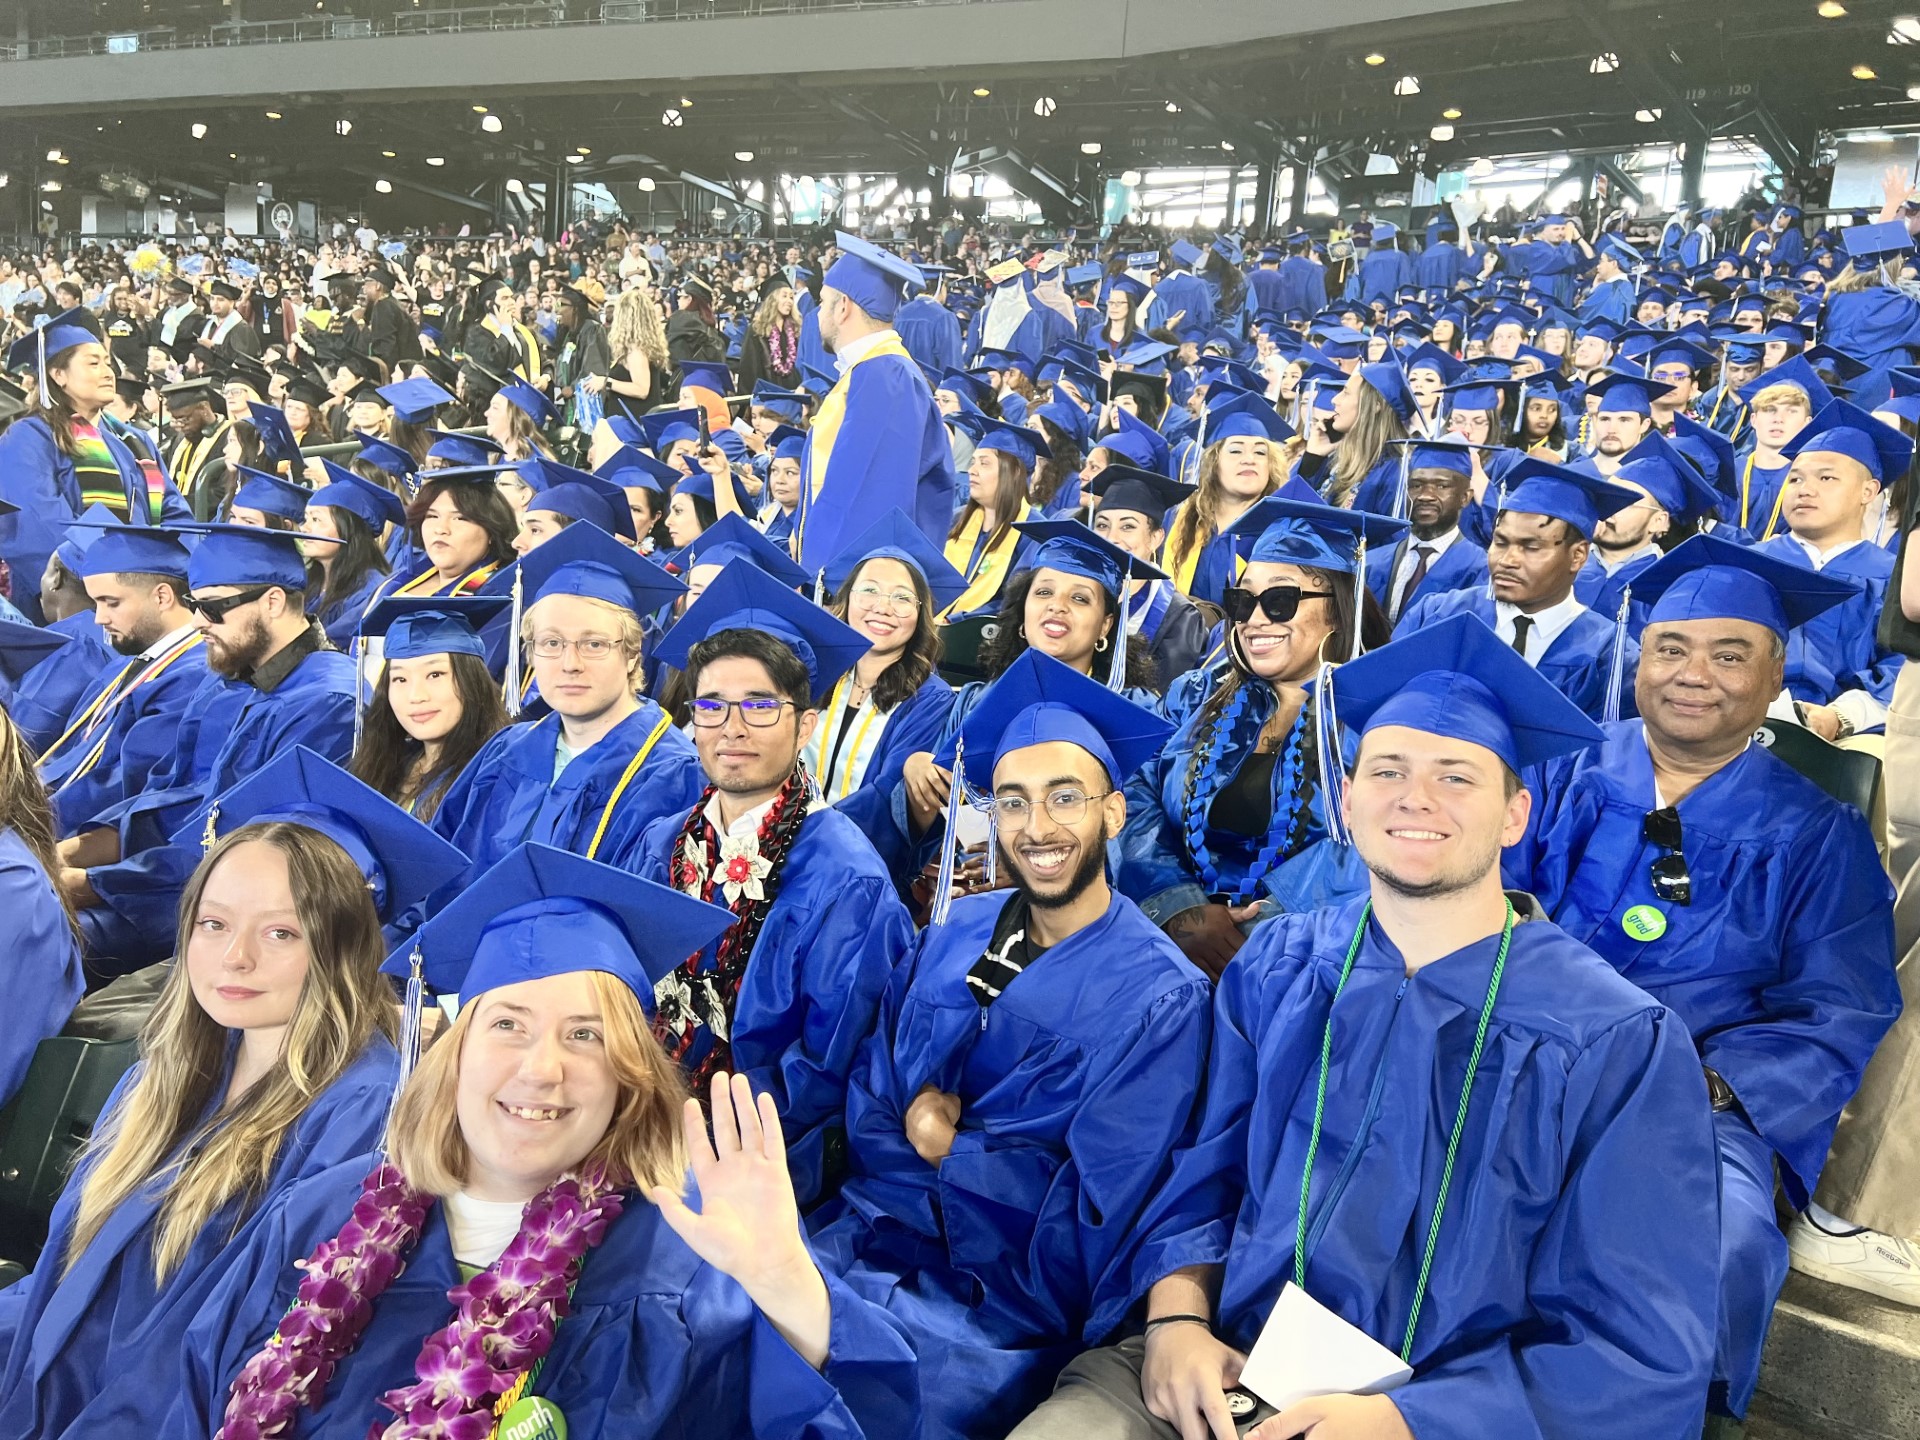 North Seattle College graduates in blue caps and gowns